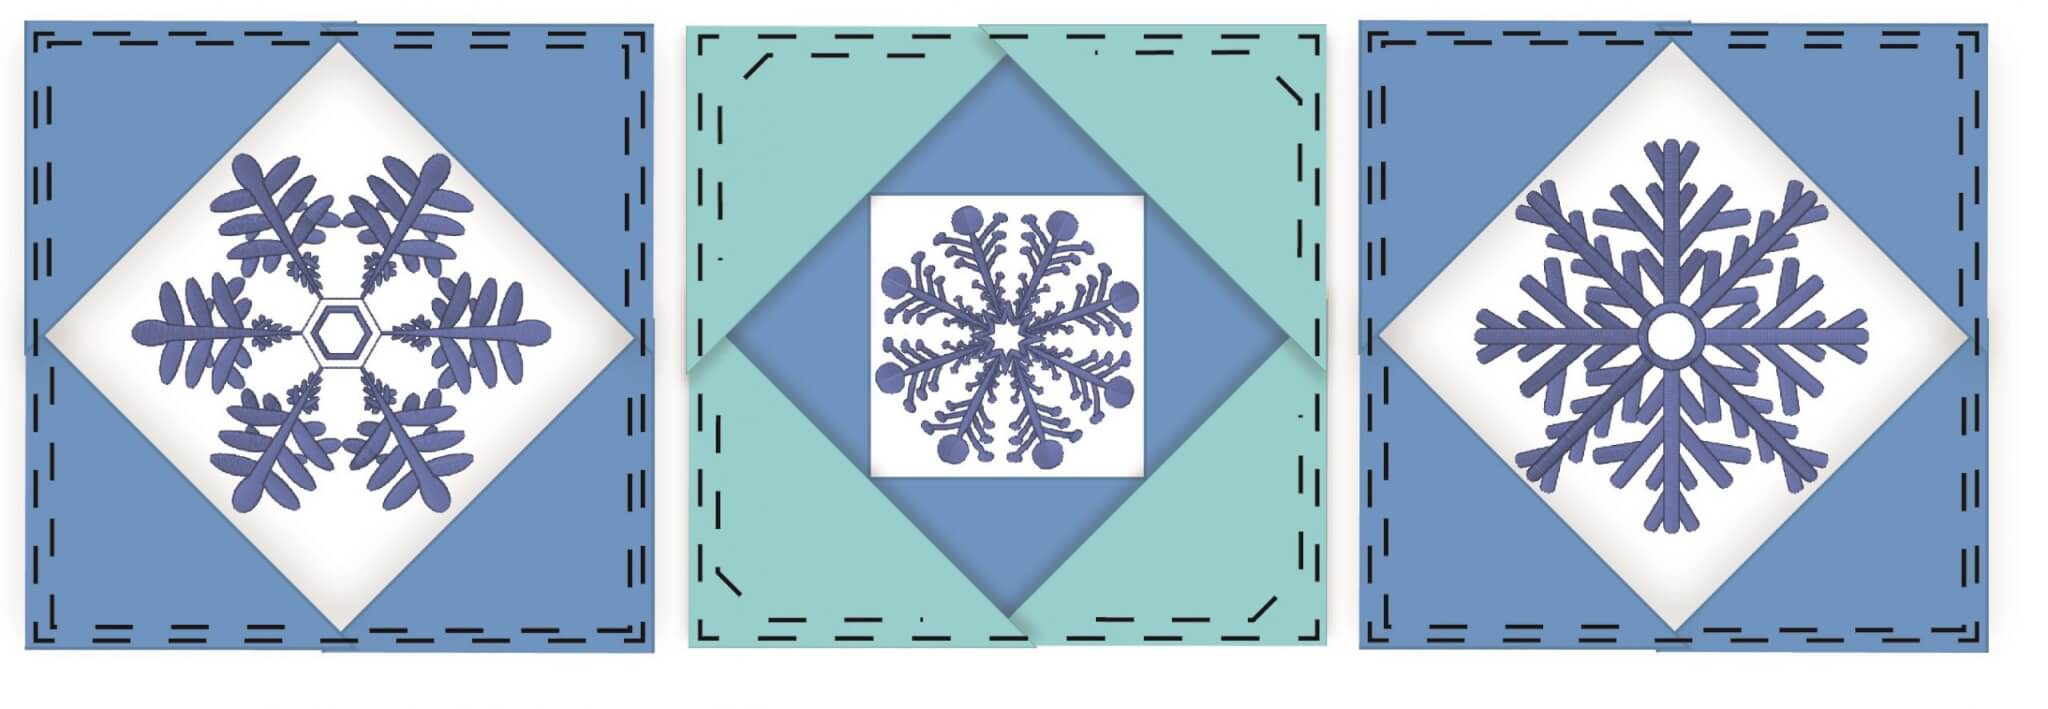 NEW! Exclusive Quick Quilting in the Hoop: Winter Snowflakes Embroidery Collection and Book available at ShopNZP.com